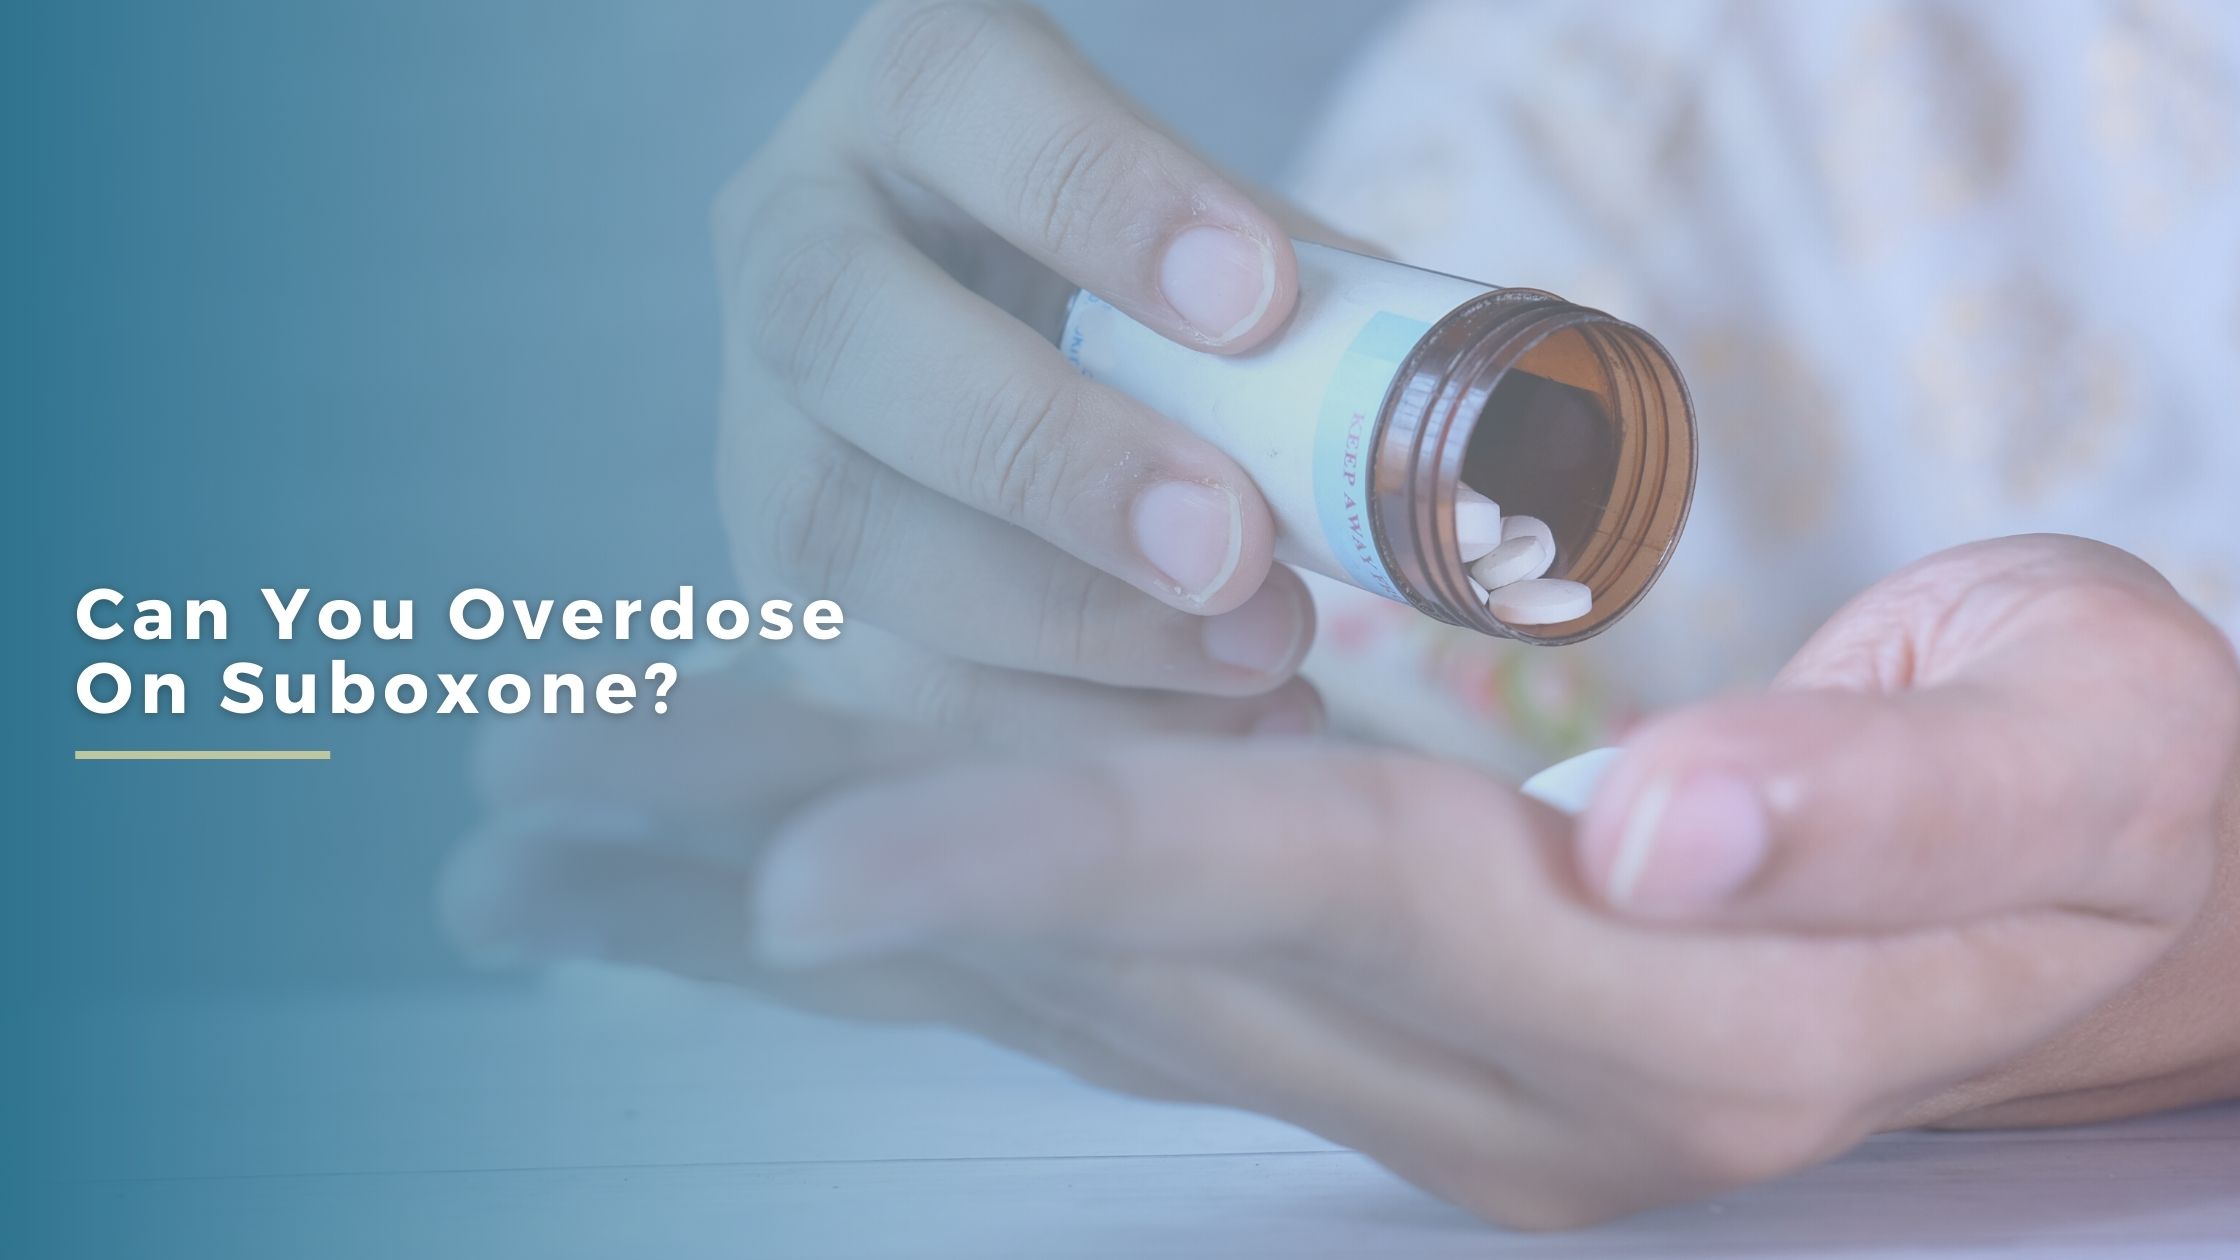 Can you overdose on suboxone?